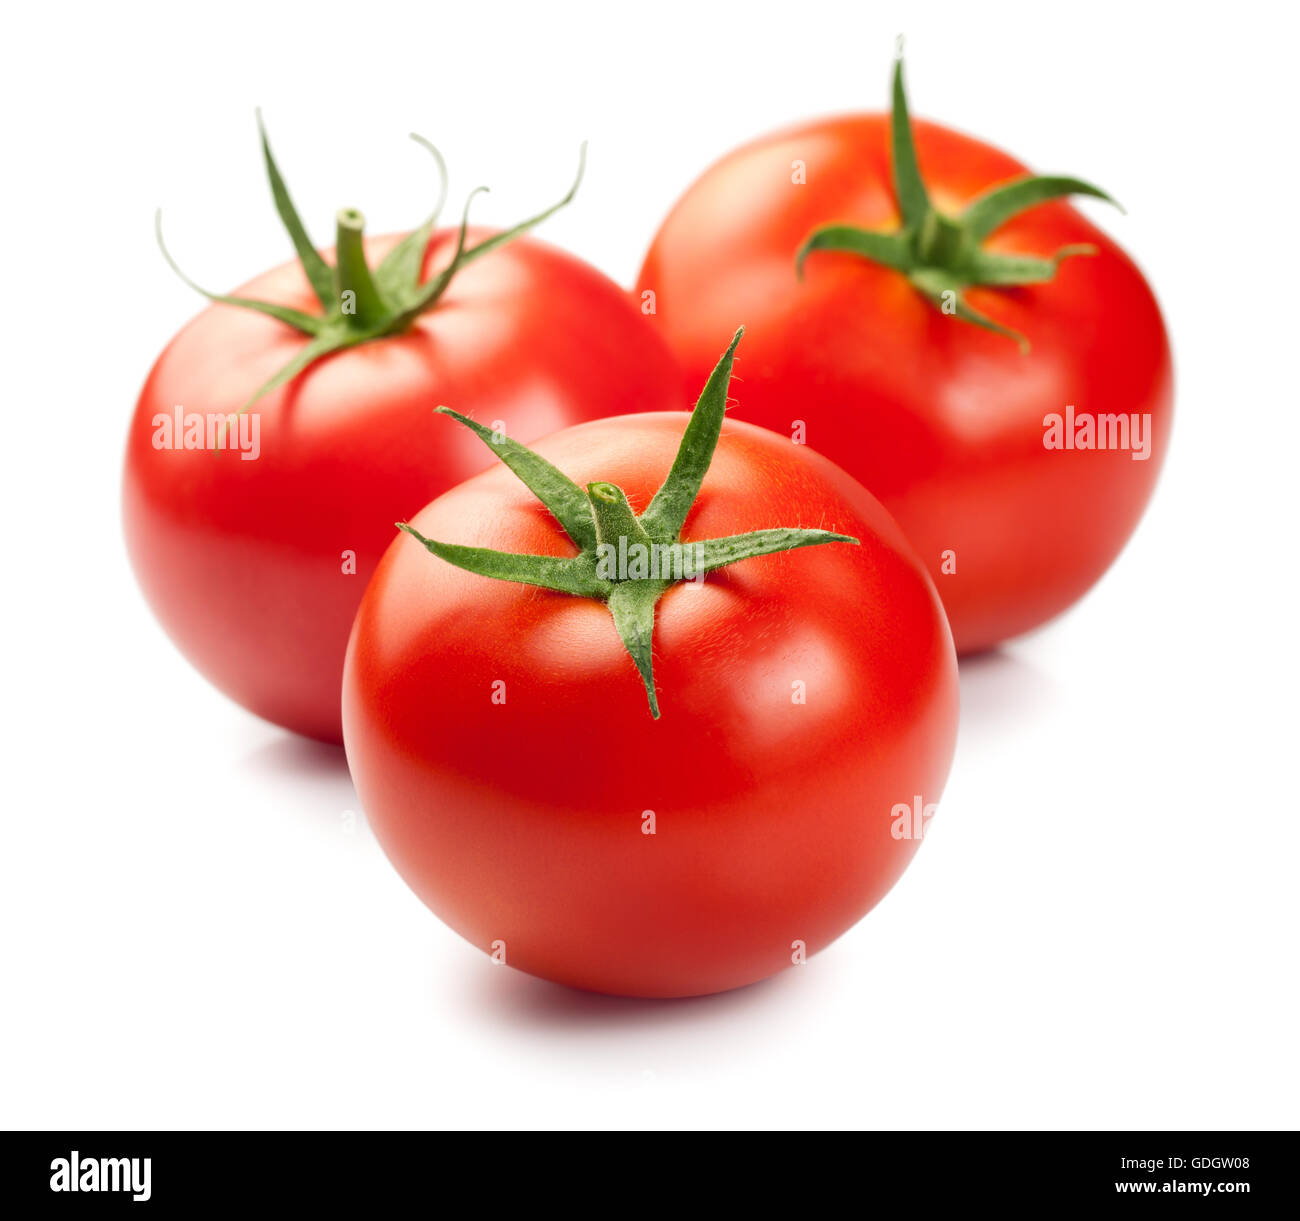 Three red ripe tomatoes isolated on white background Stock Photo